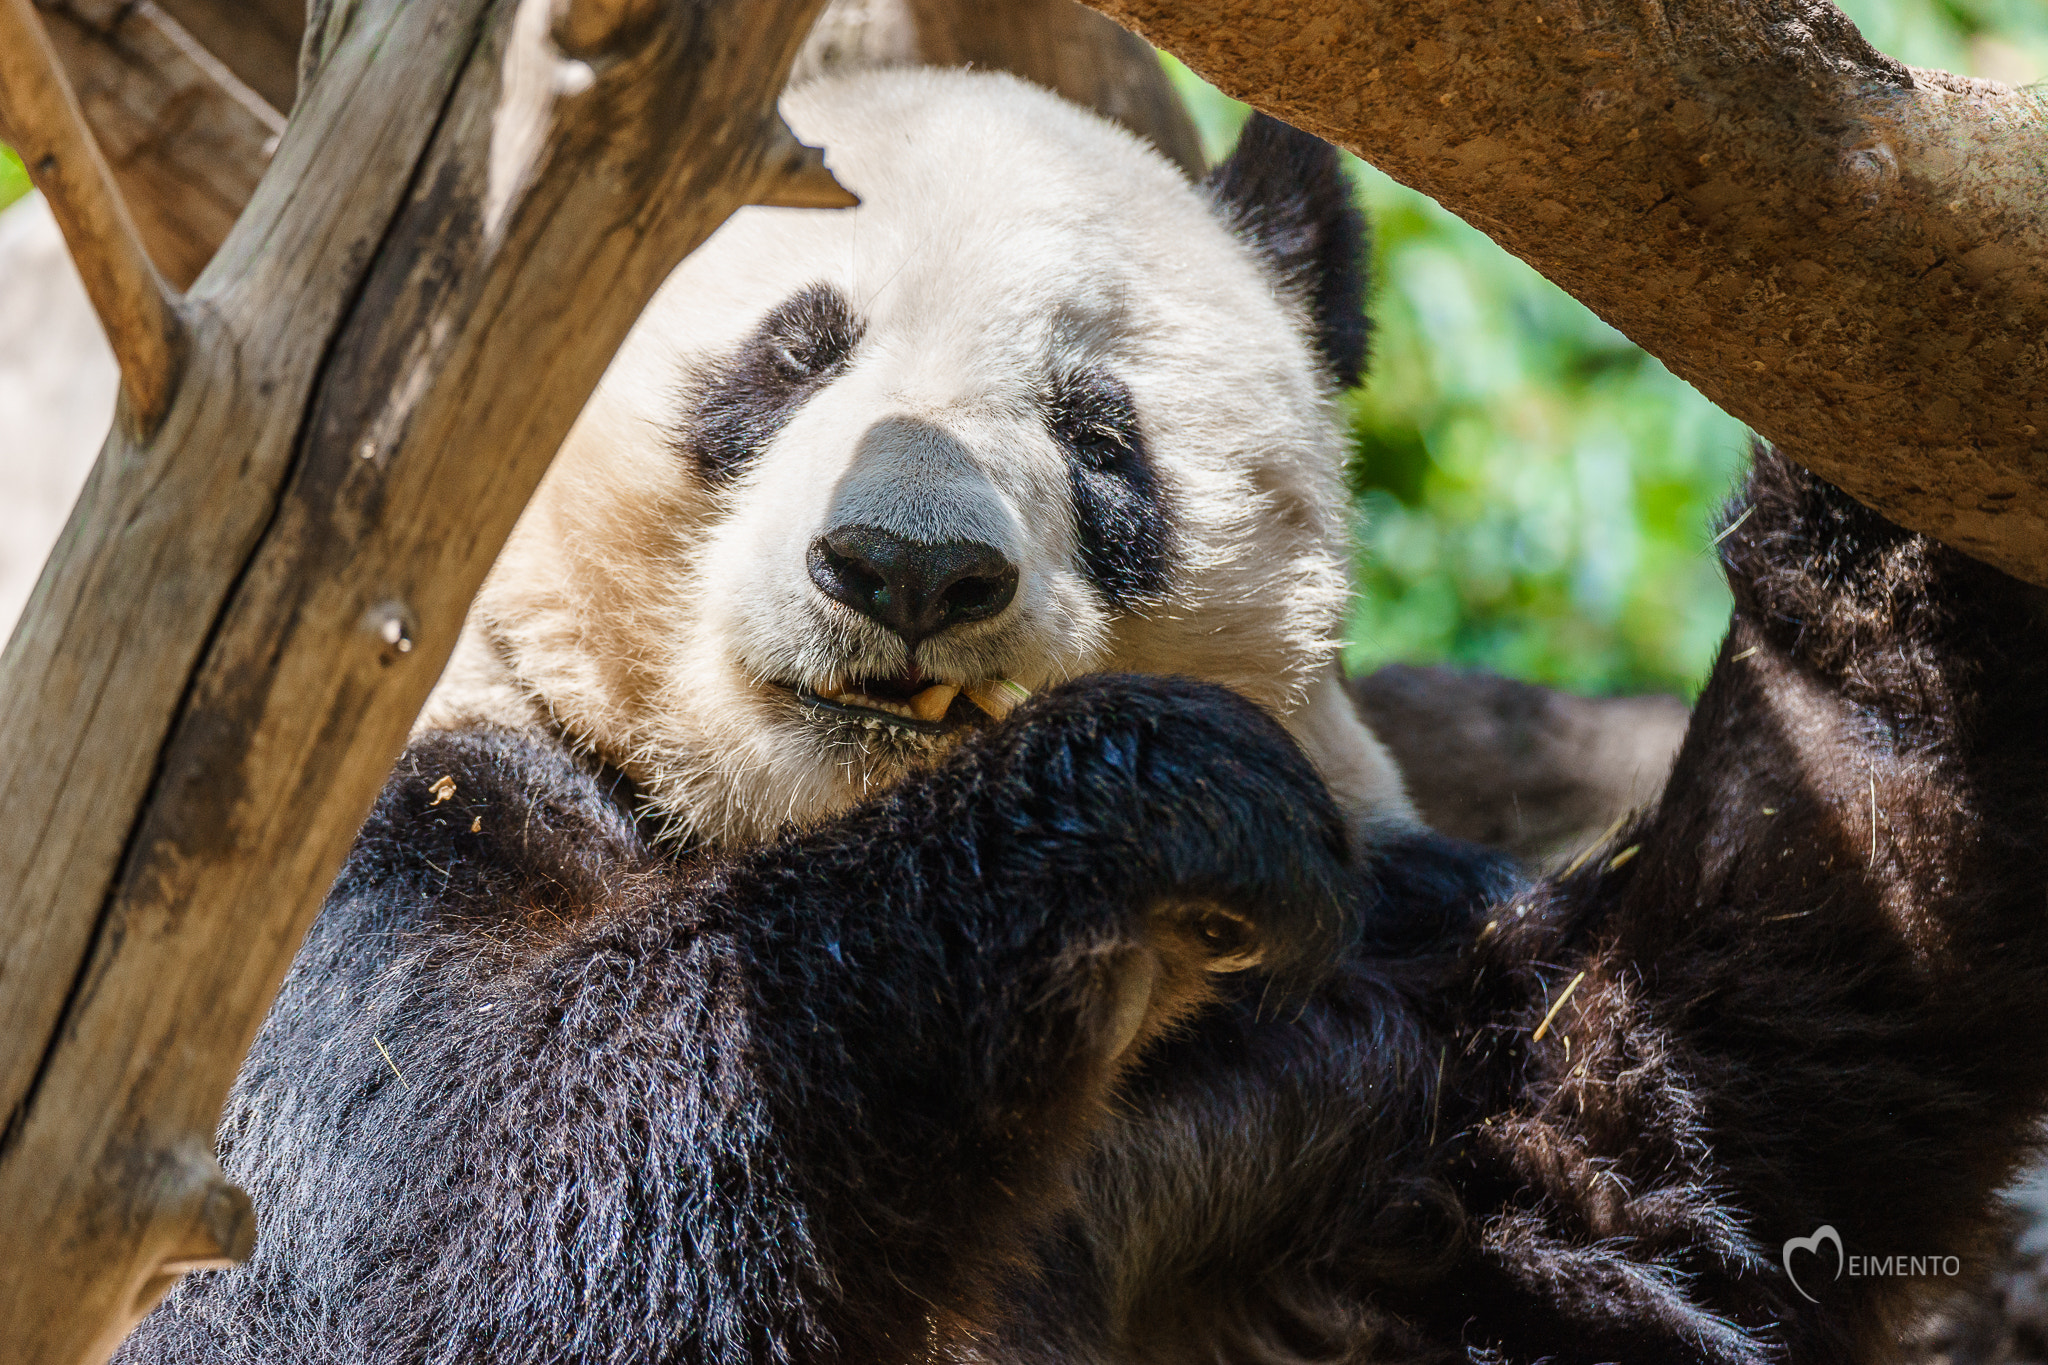 Sony a7 II + Tamron SP 150-600mm F5-6.3 Di VC USD sample photo. Giant panda lunch time! photography